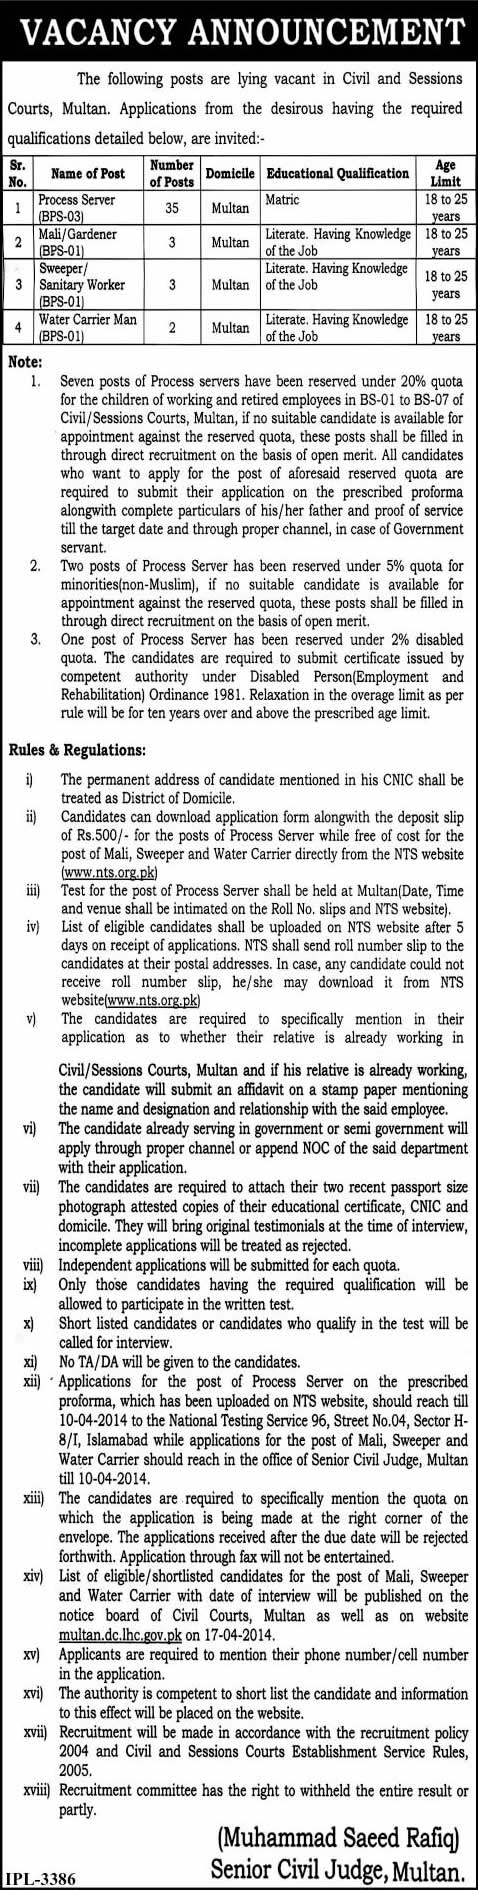 Civil & Session Courts Multan Jobs 2014 March / April for Process Server, Mali, Sweeper & Water Carrier Man